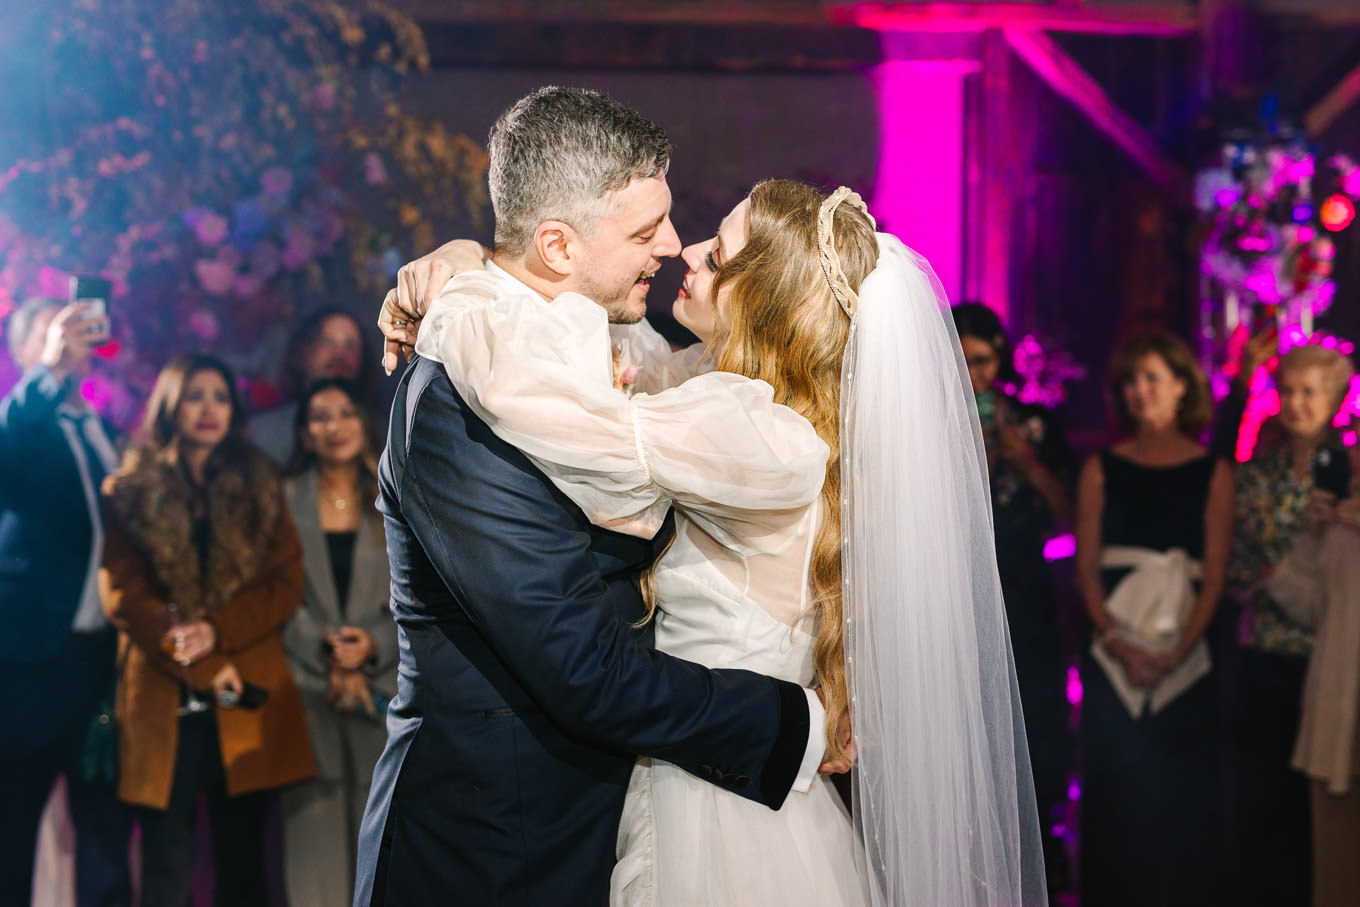 Bride and groom first dance at wedding | Colorful and quirky wedding at Higuera Ranch in San Luis Obispo | #sanluisobispowedding #californiawedding #higueraranch #madonnainn   
Source: Mary Costa Photography | Los Angeles